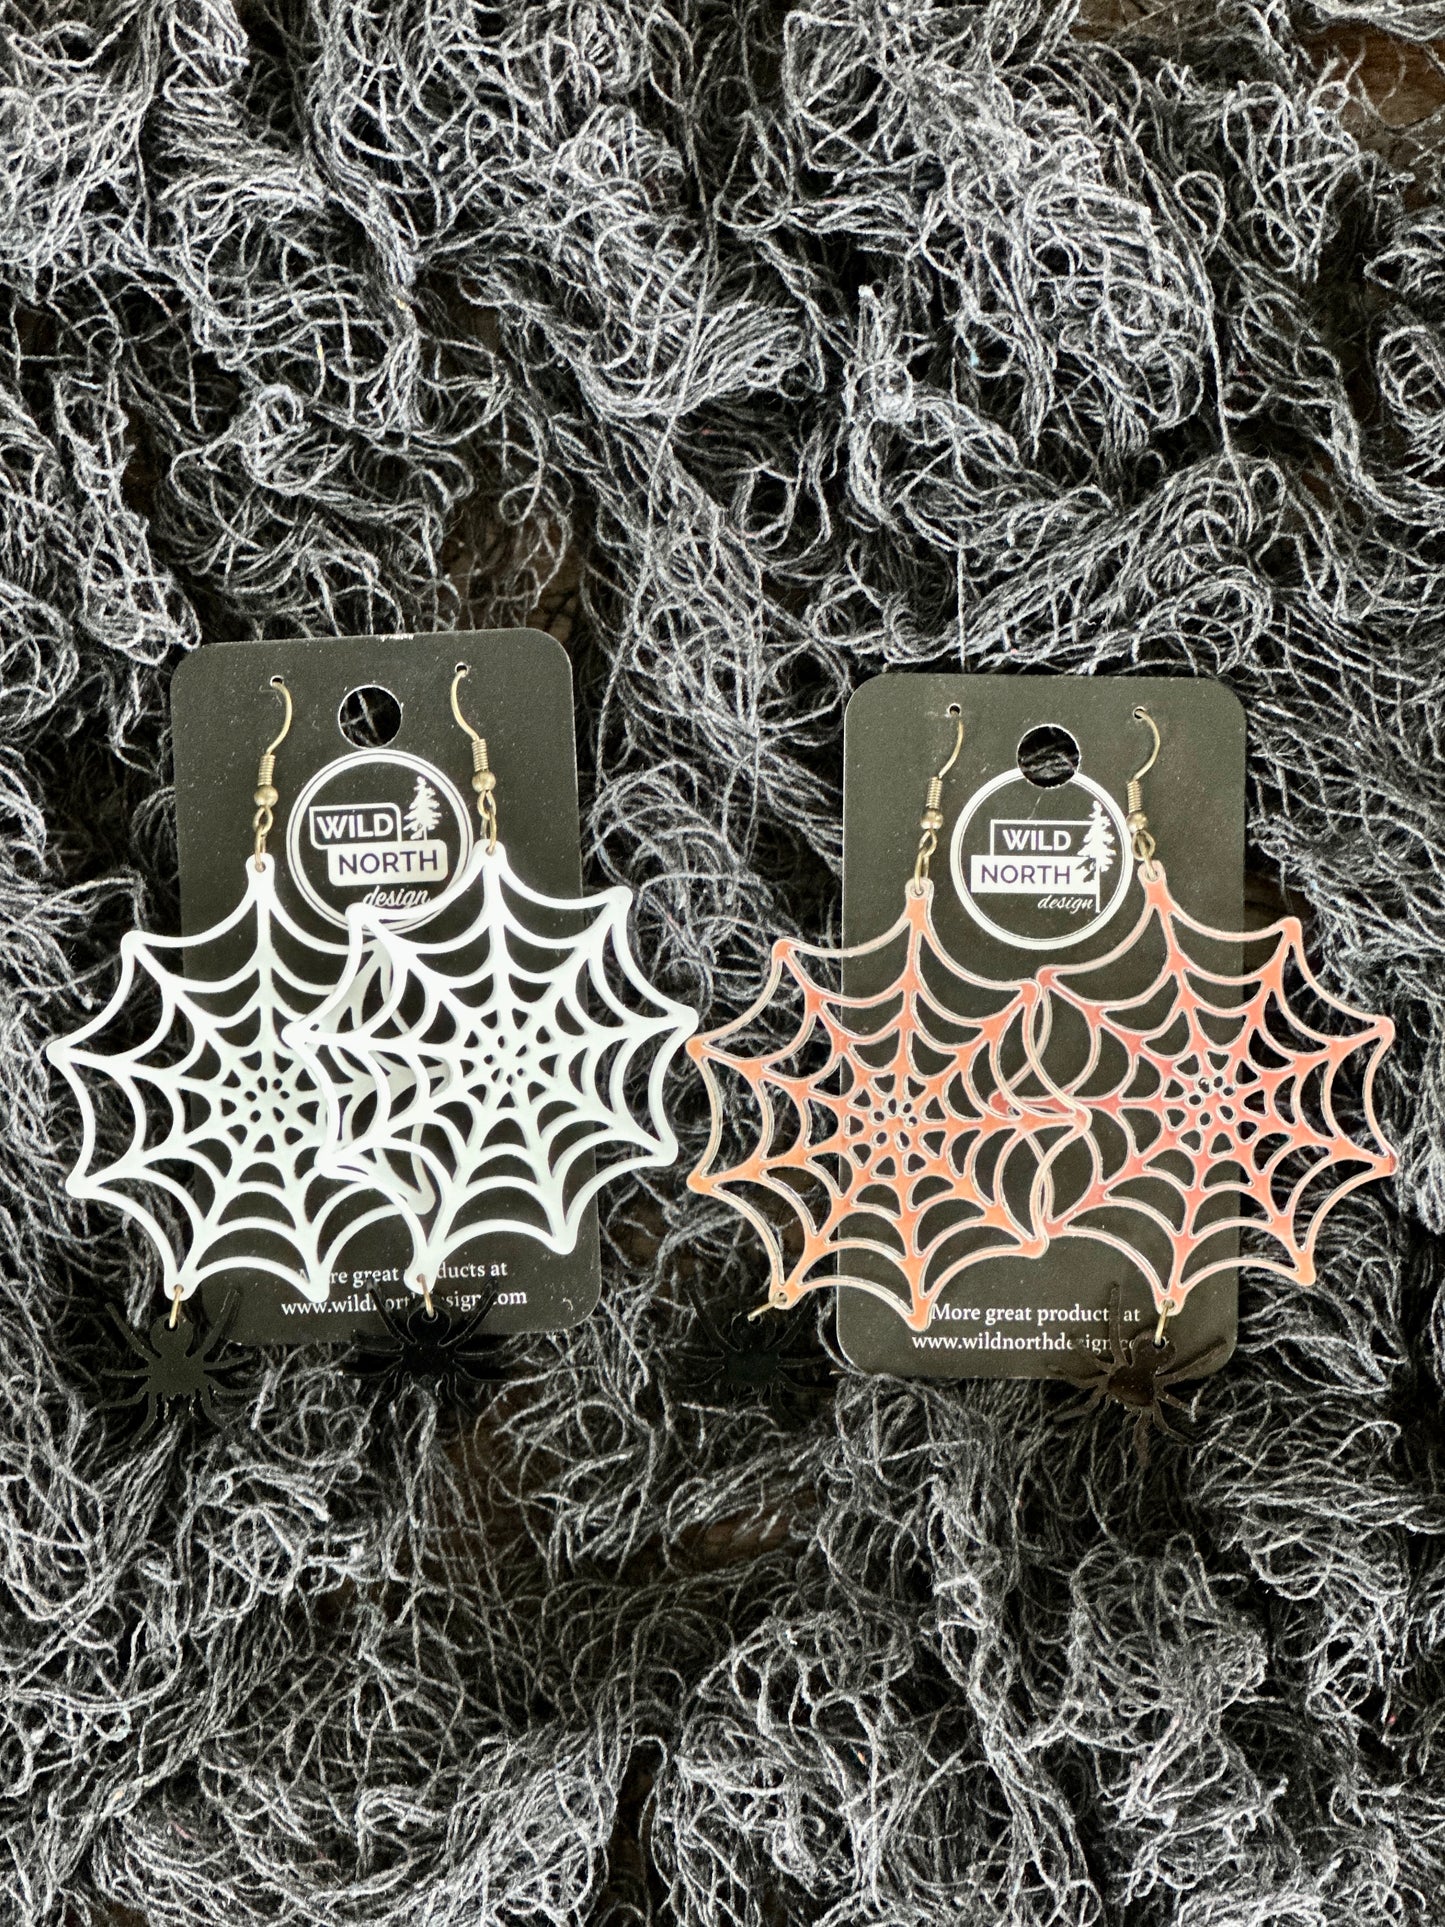 Spider web and spider Iridescent Halloween earrings